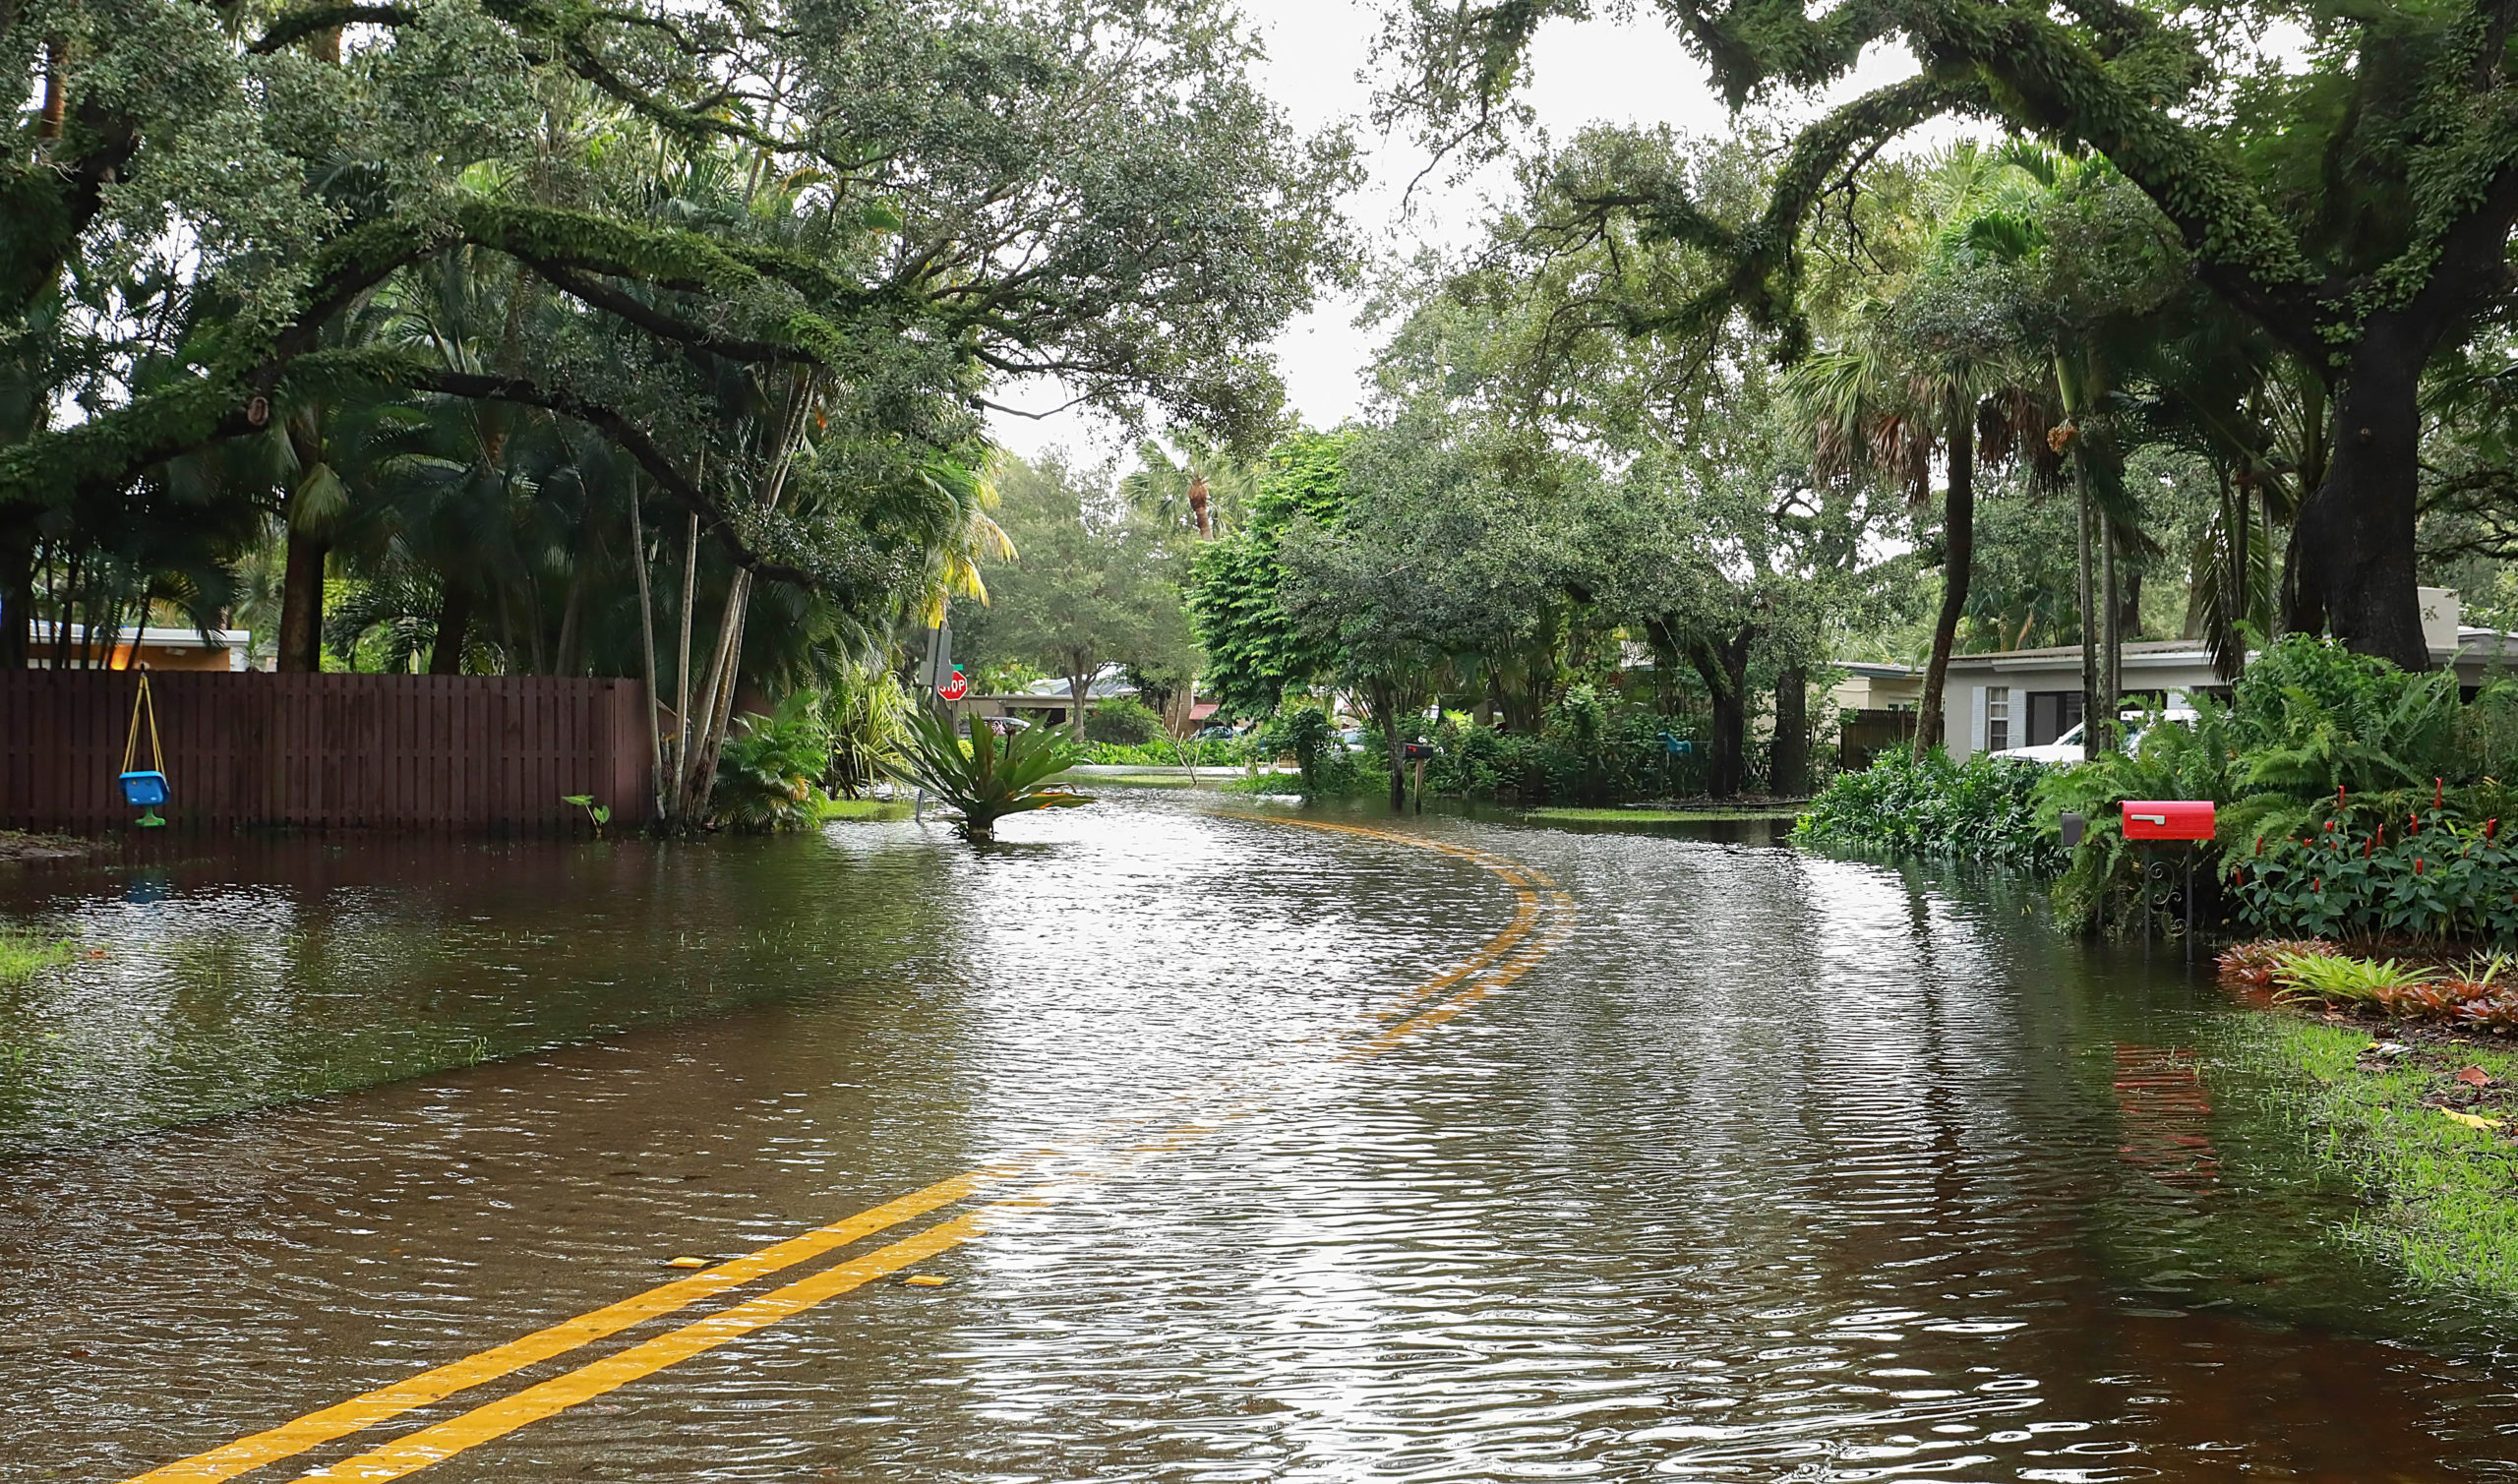 Water from Tropical Storm Eta flooded a street in Fort Lauderdale, Florida, in 2020.